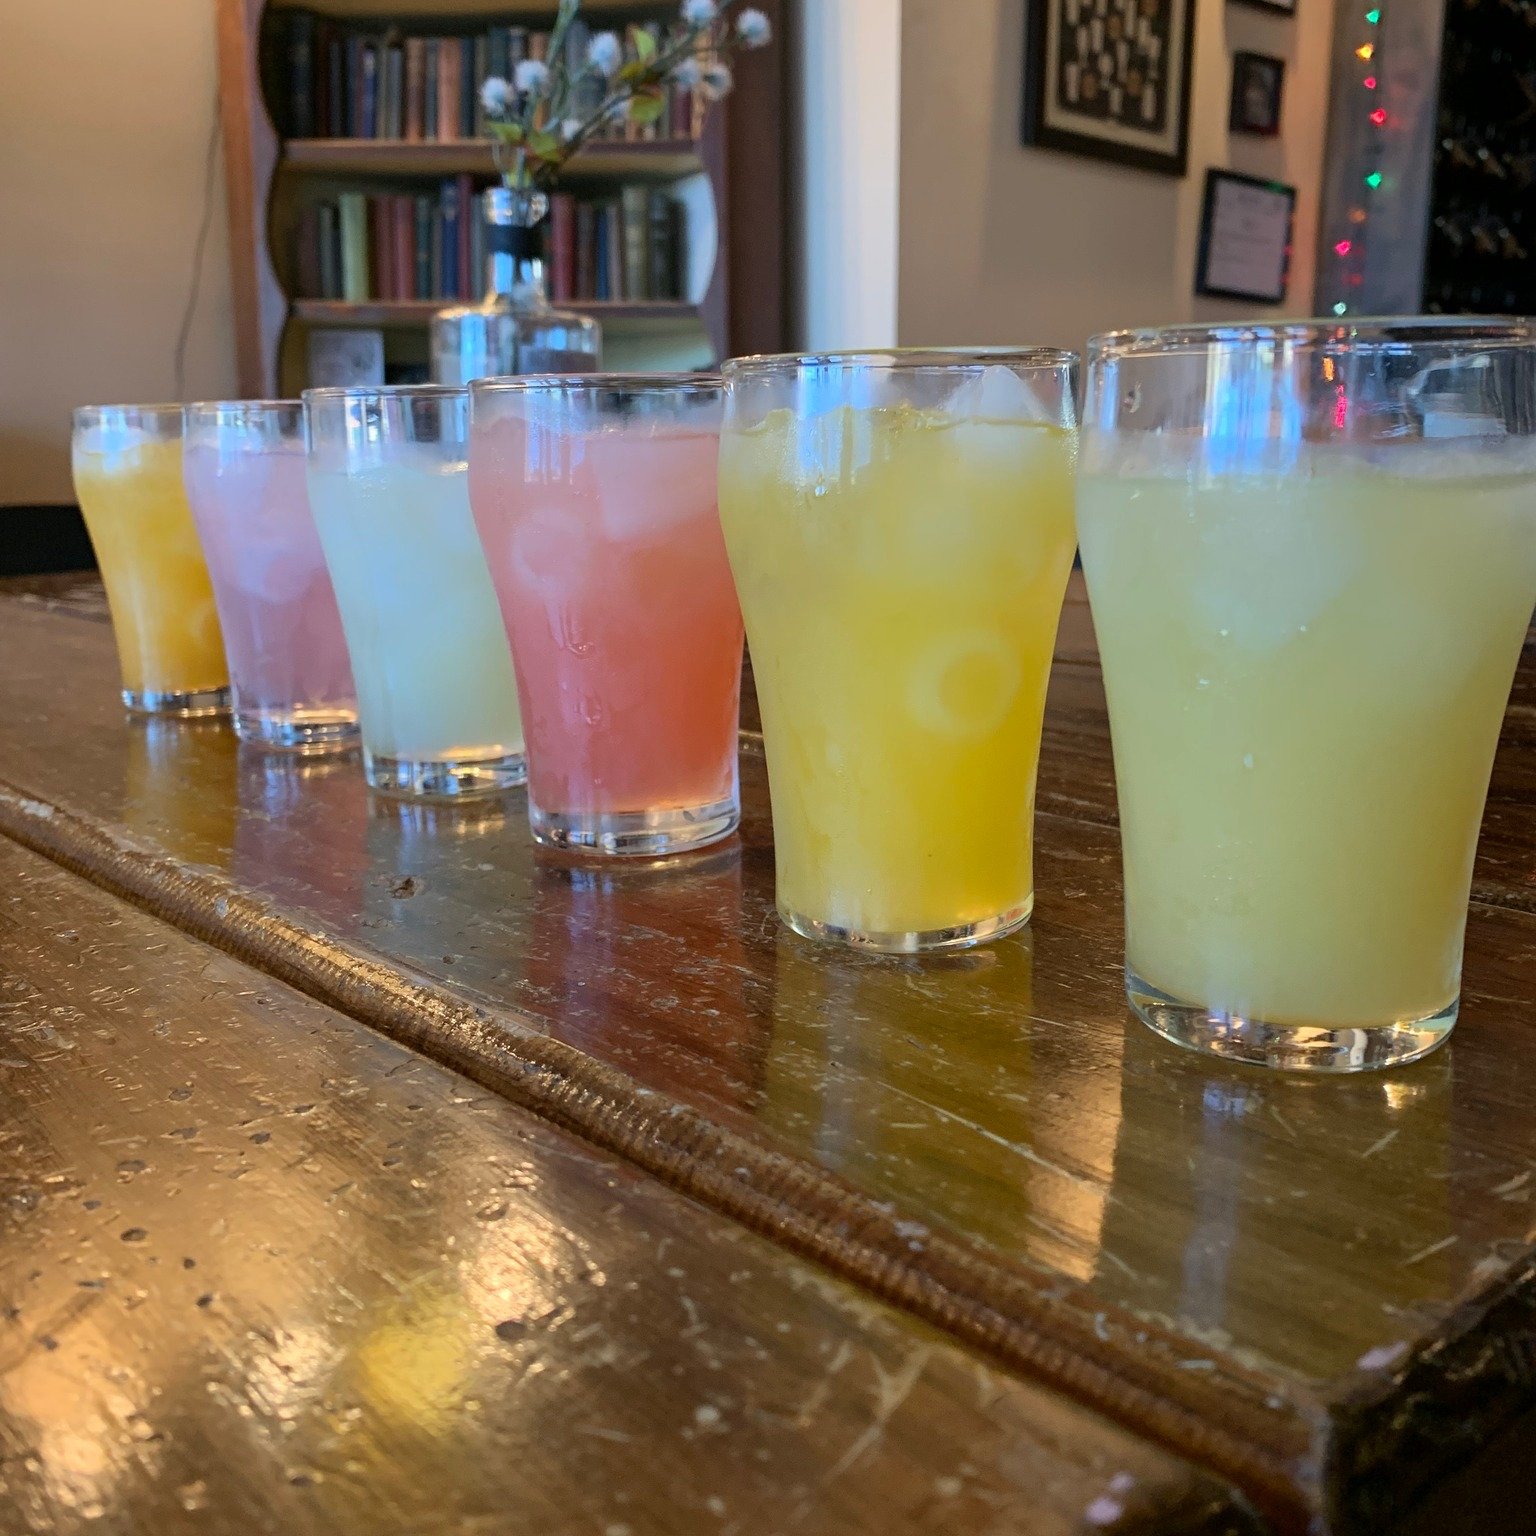 What's that? A margarita flight? Come join us this weekend (Thursday-Saturday) for 4 for $15 Margarita flights to celebrate Cinco de Mayo! We'll be offering 6 flavors, because we just can't help ourselves. 

Pick your 4 favorites from the following, 